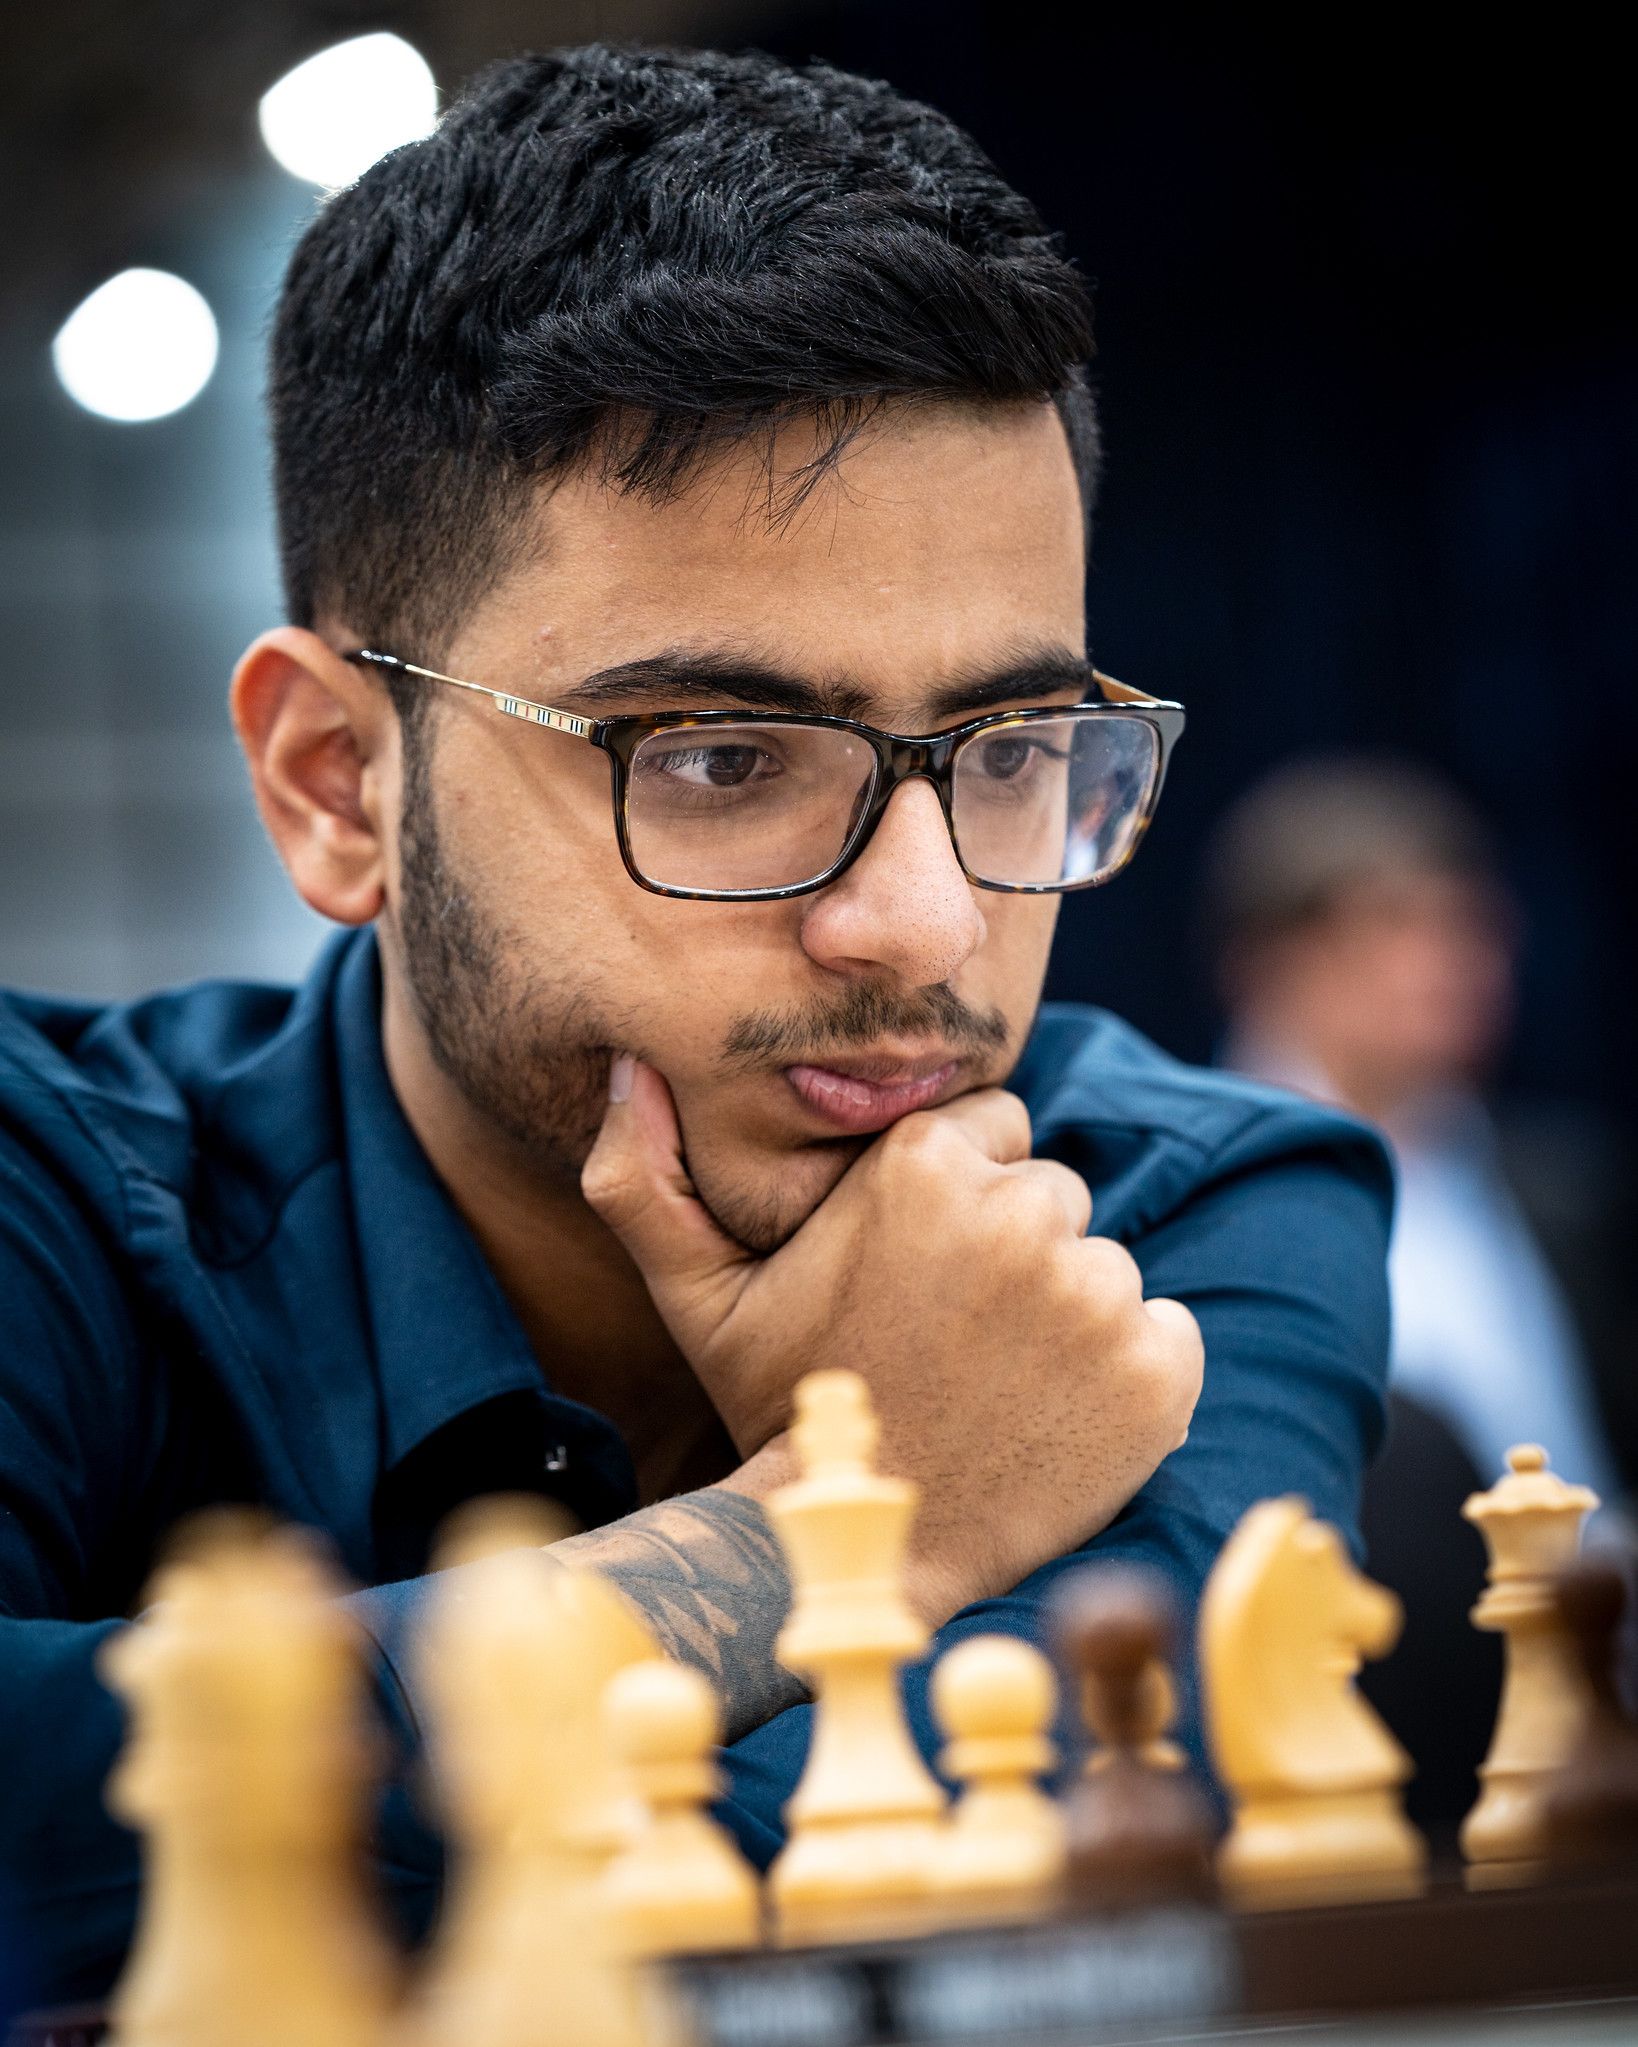 WR Chess Masters 8: Keymer ends So's hopes